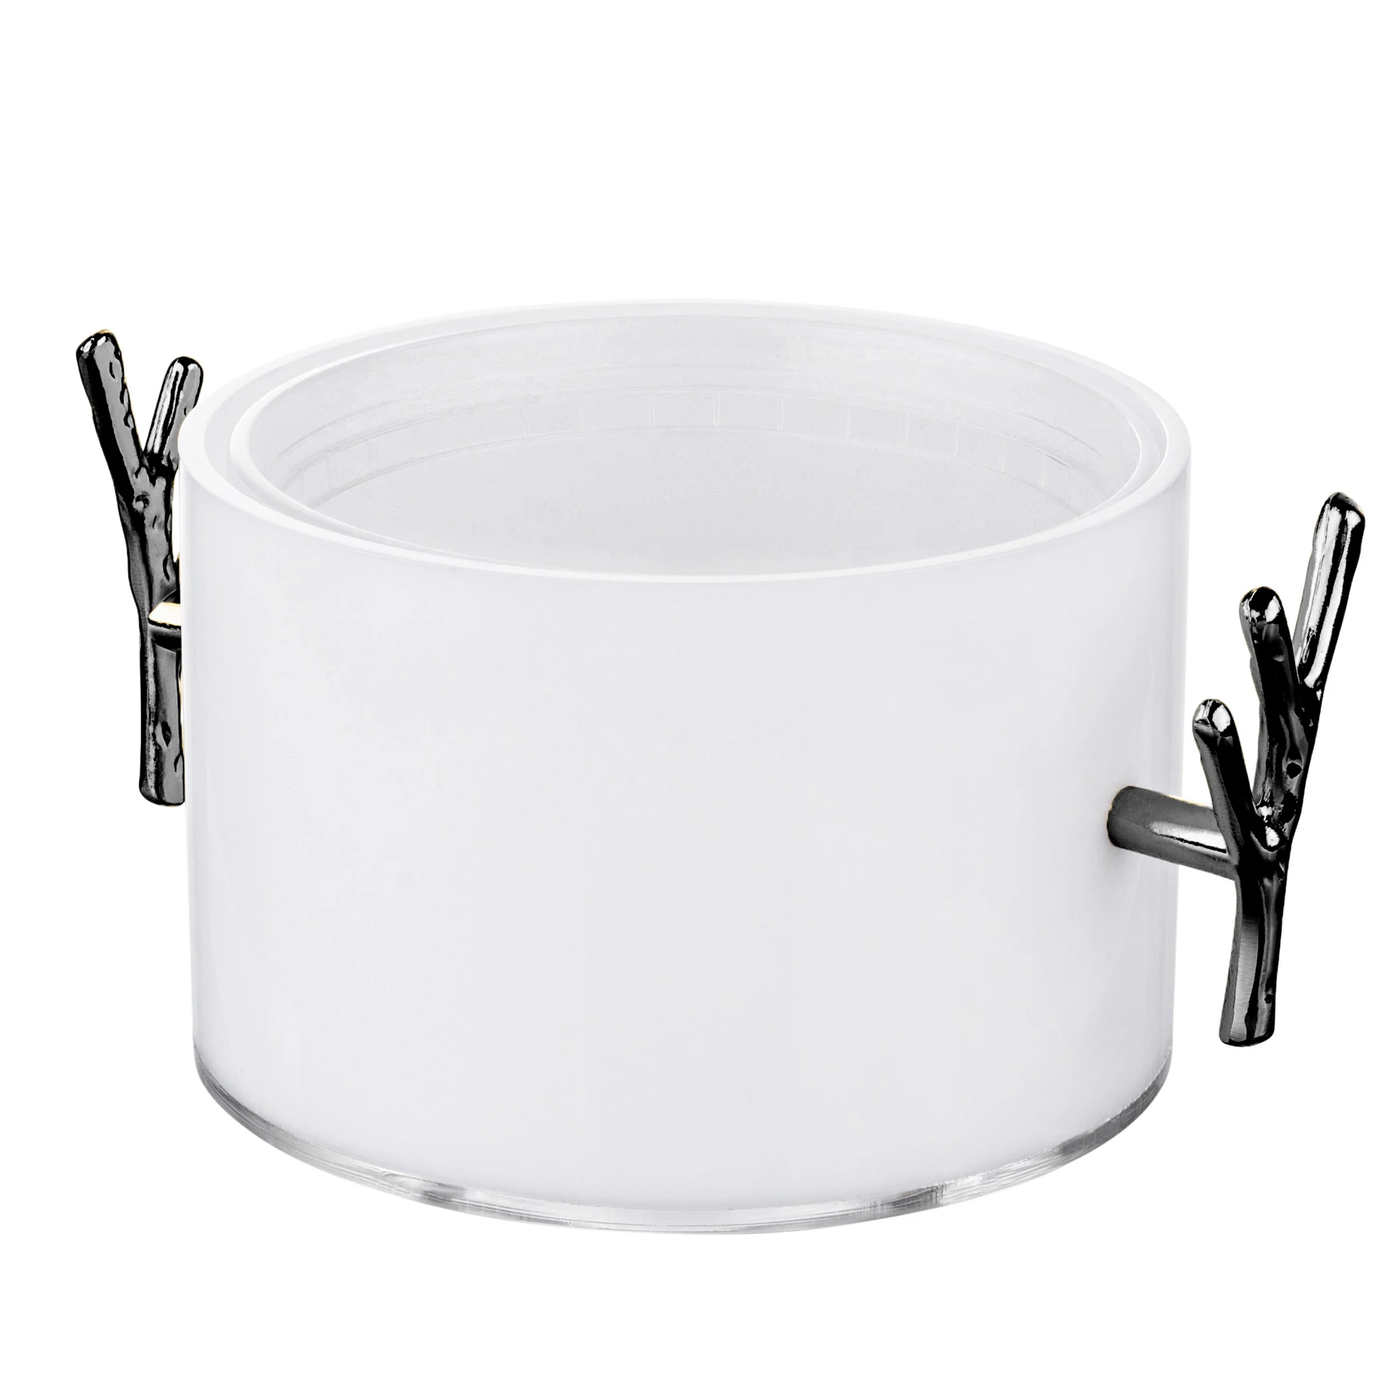 1 lb. Dip Bowl with Twig Handles - White & Black - Set With Style